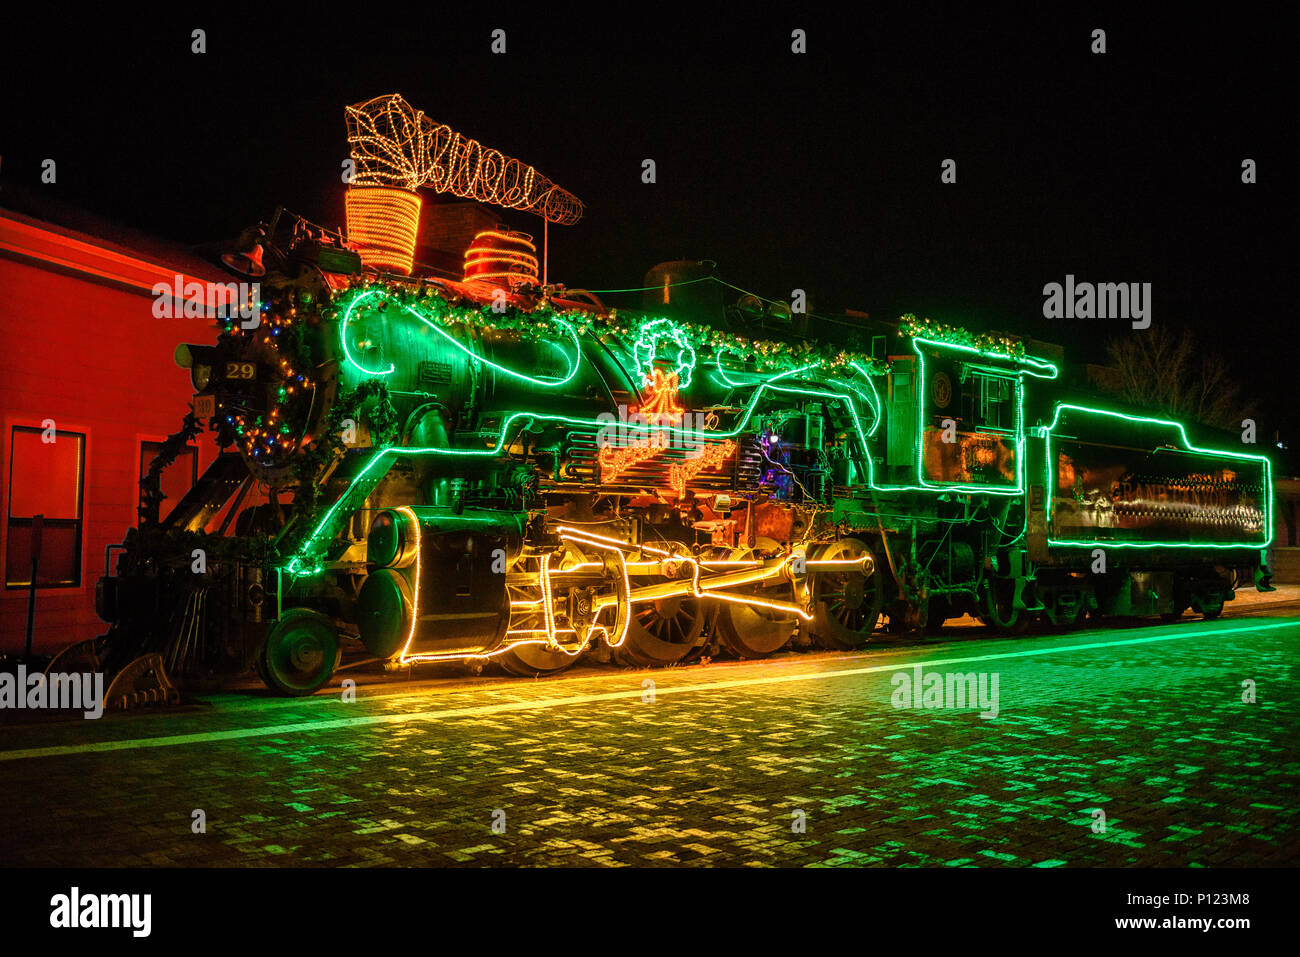 A steam locomotive decorated with Christmas lights in Williams, Arizona Stock Photo